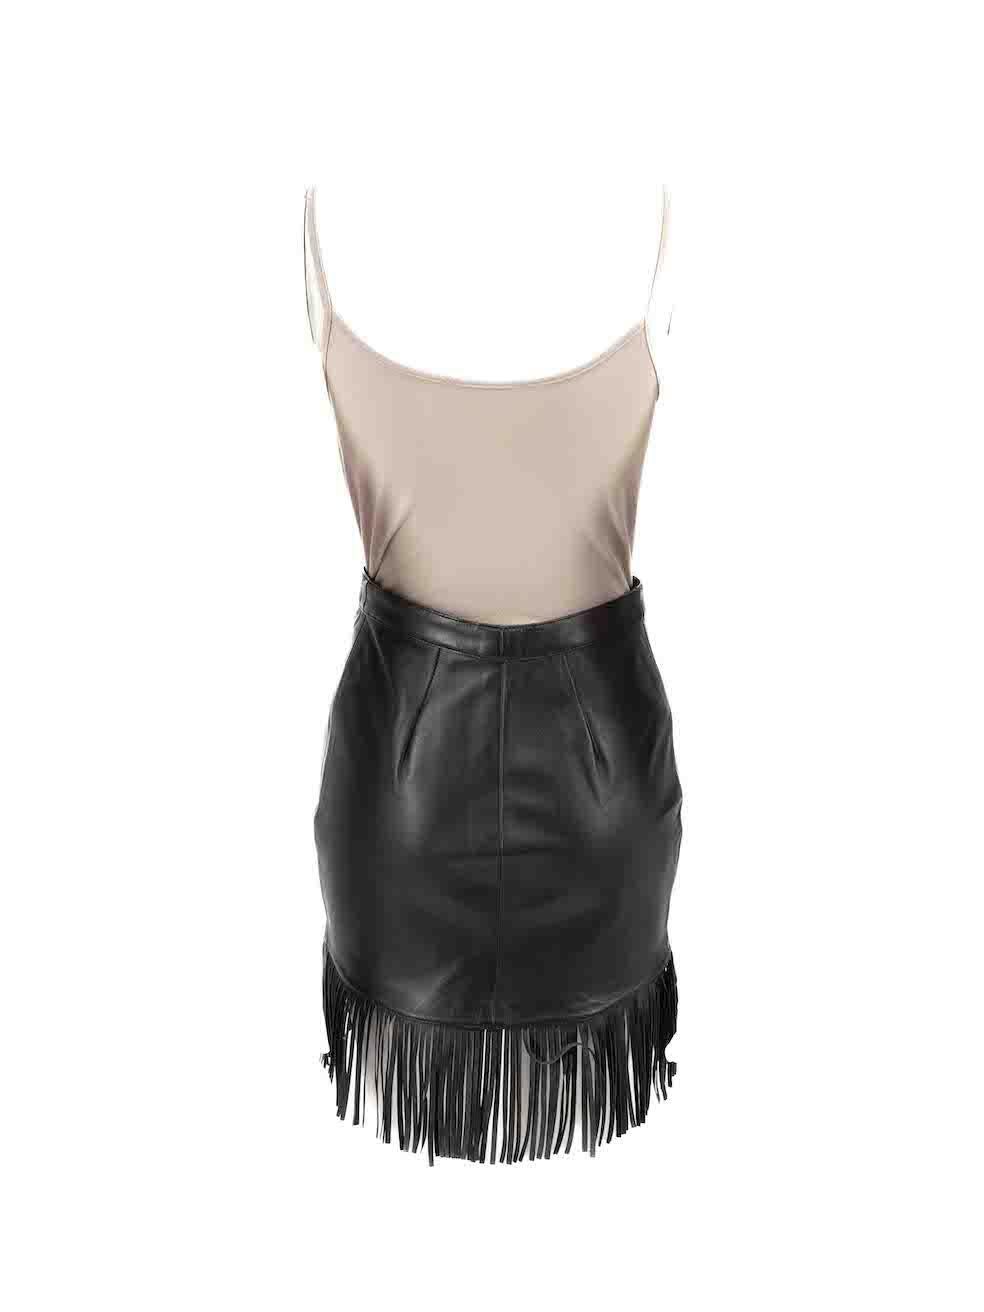 Maje Black Leather Fringed Hem Skirt Size S In Good Condition For Sale In London, GB